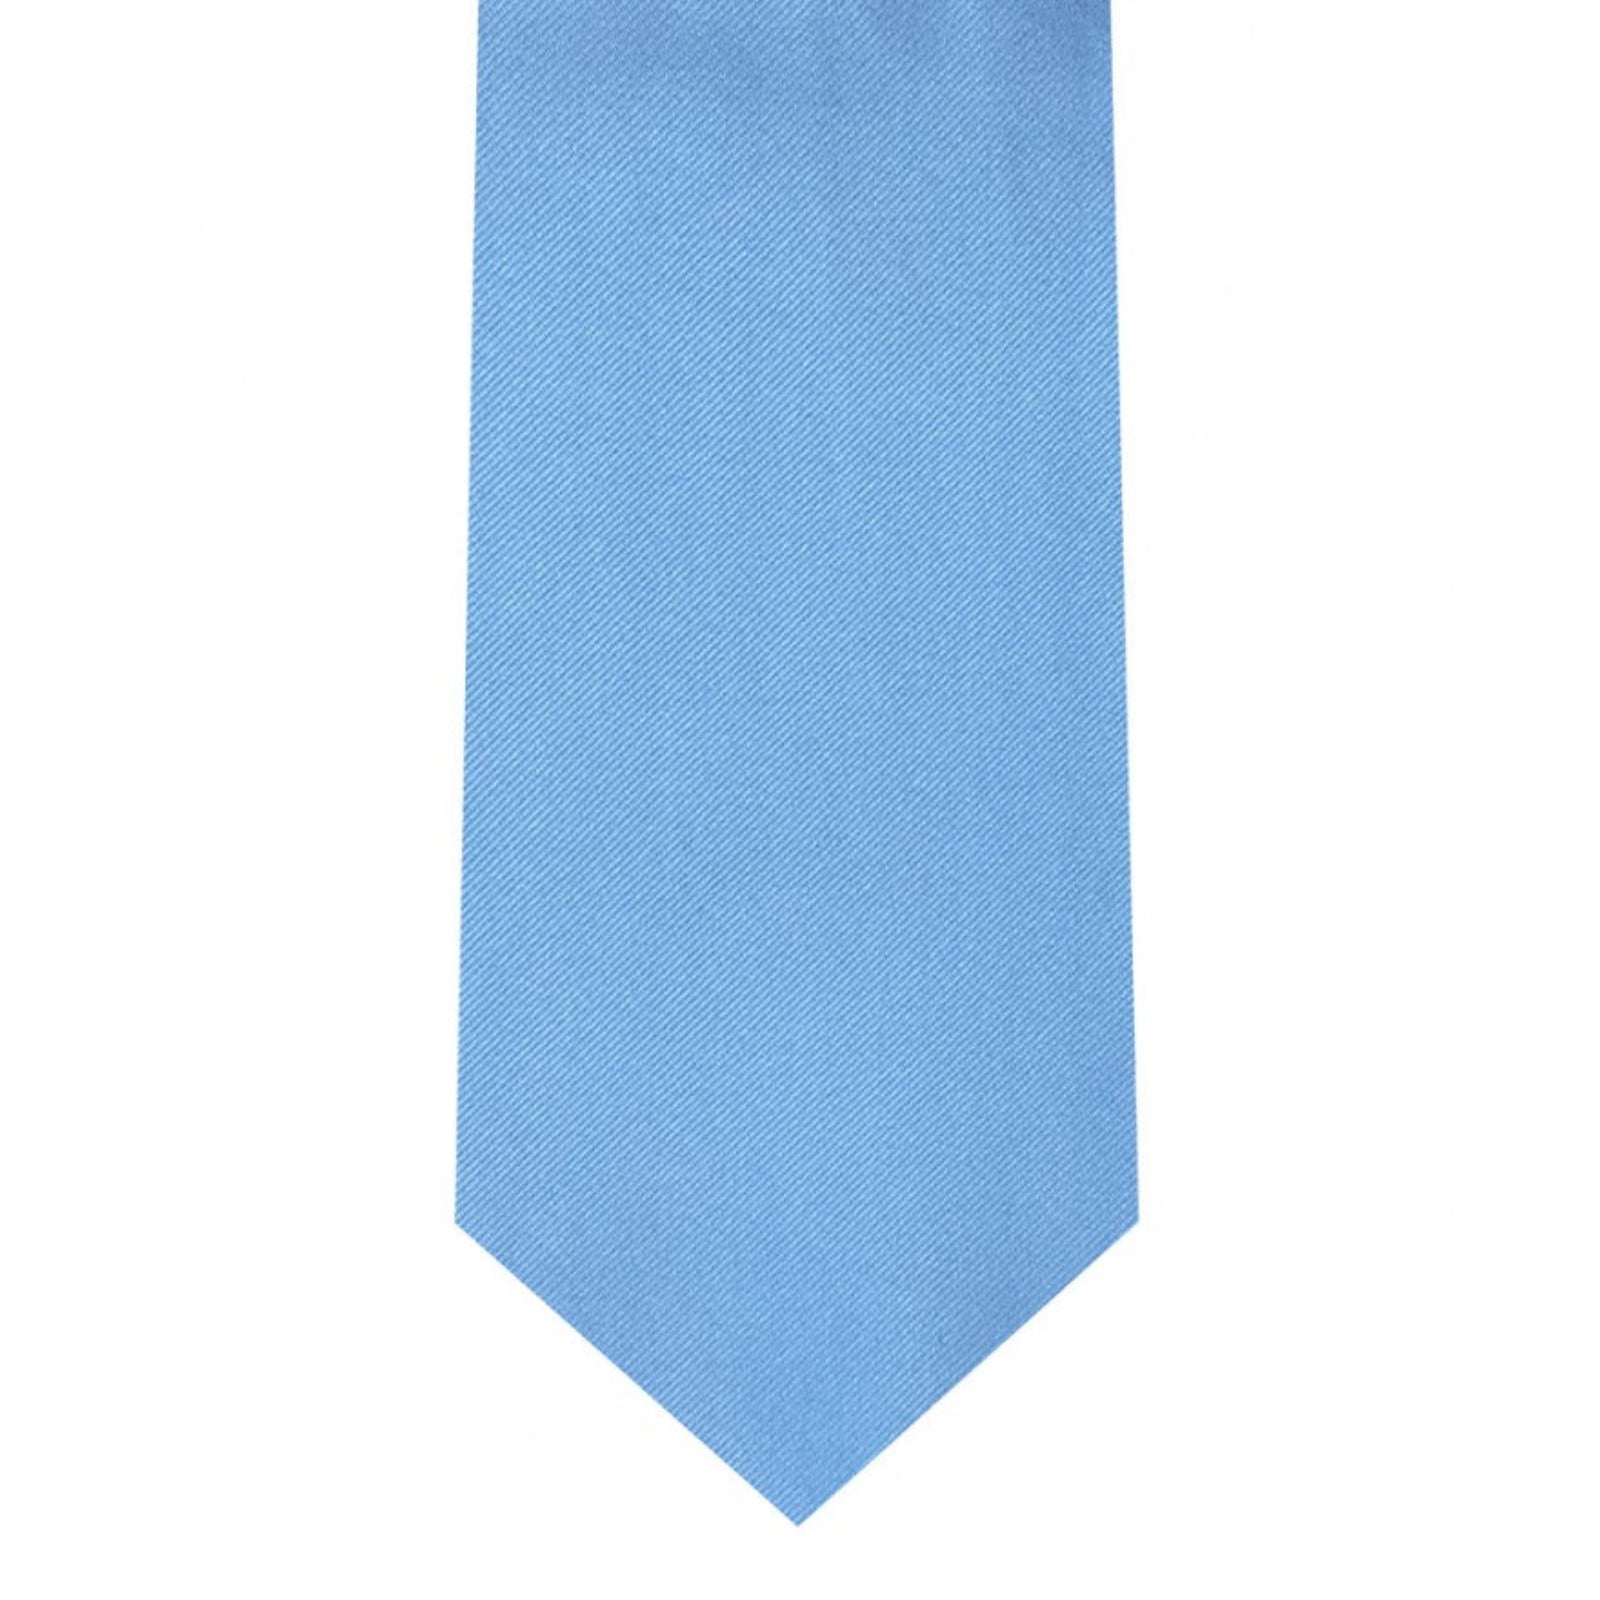 Classic Baby Blue Tie Skinny width 2.75 inches With Matching Pocket Square | KCT Menswear